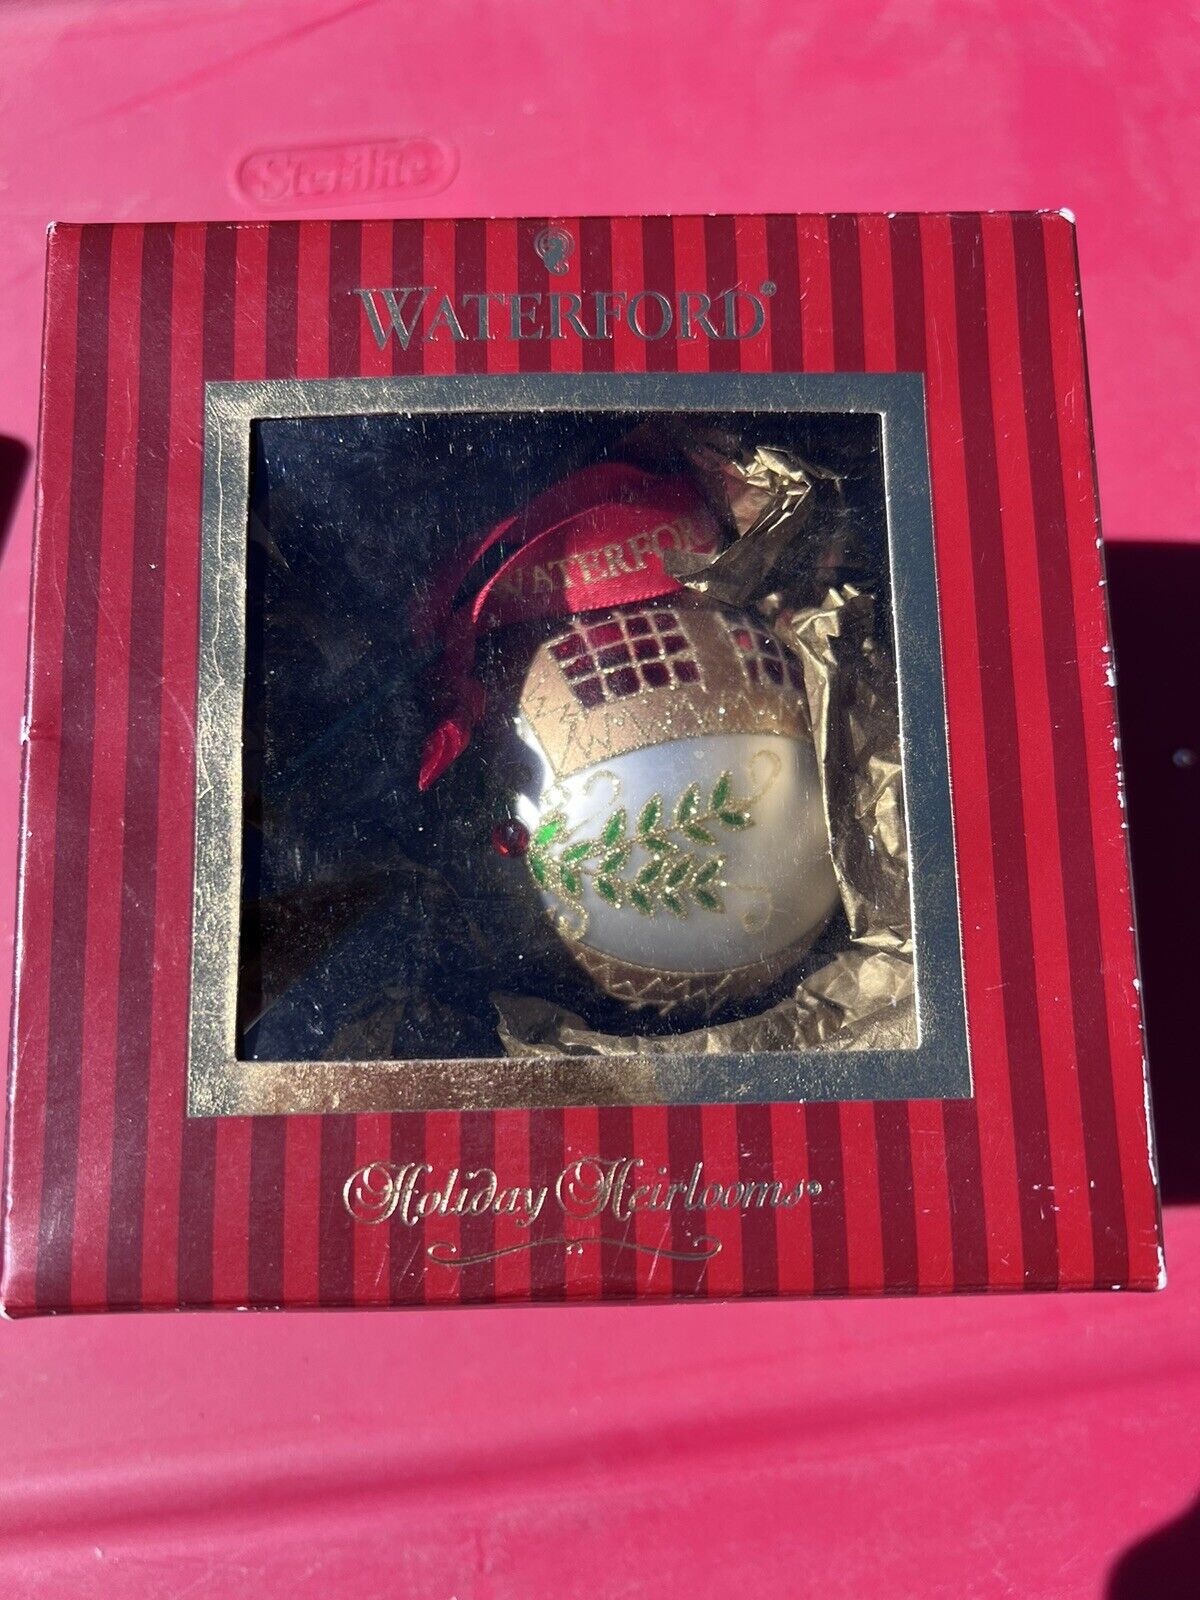 RARE WATERFORD HOLIDAY HEIRLOOMS Antique Elegance Ball Ornament In Box W/Ribbon